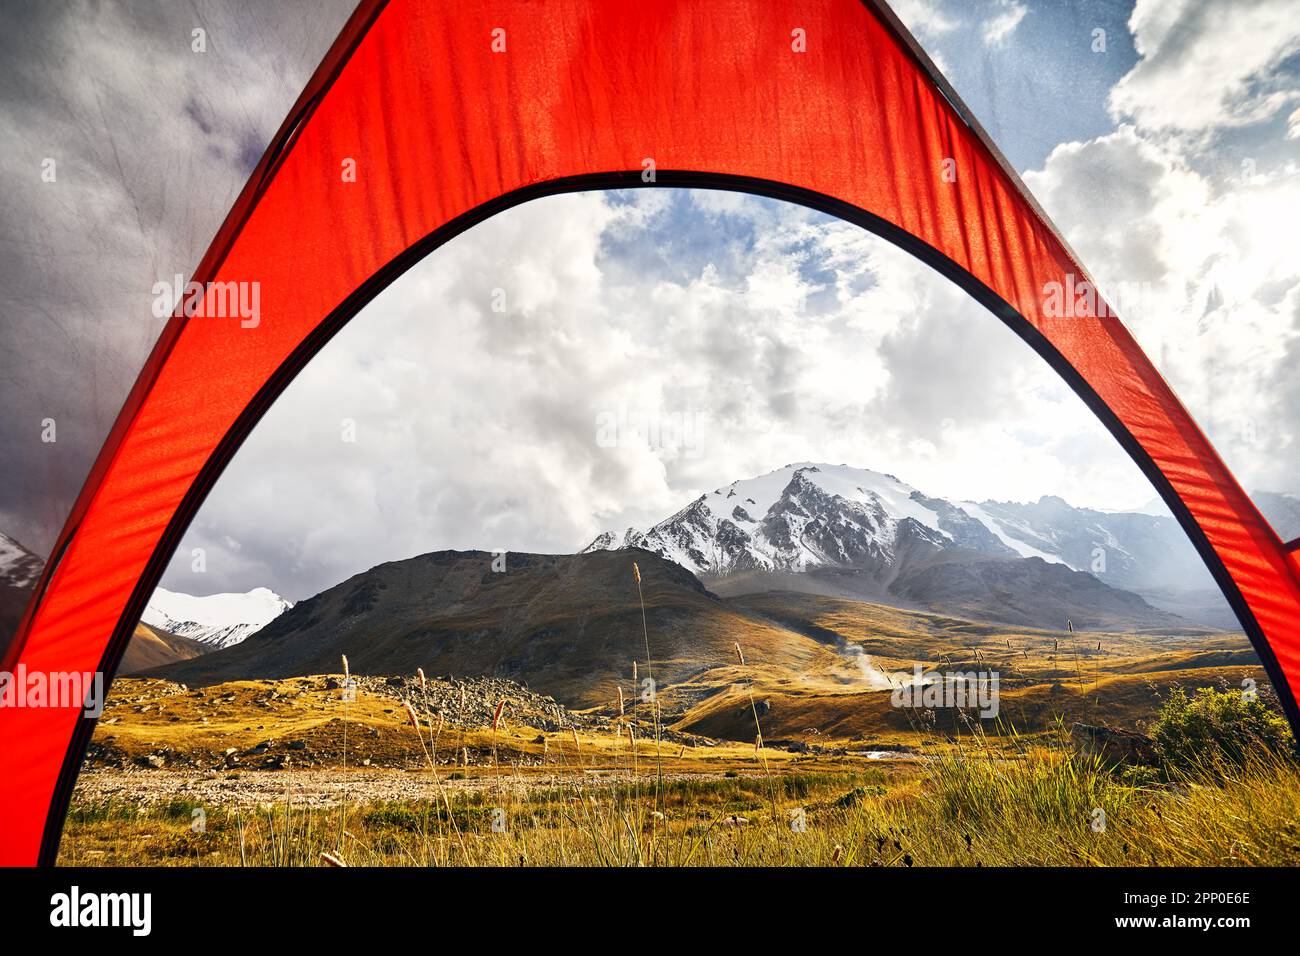 View from inside a tent of the mountains valley with glacier landscape concept of trekking in Central Asia Kazakhstan, Almaty Stock Photo